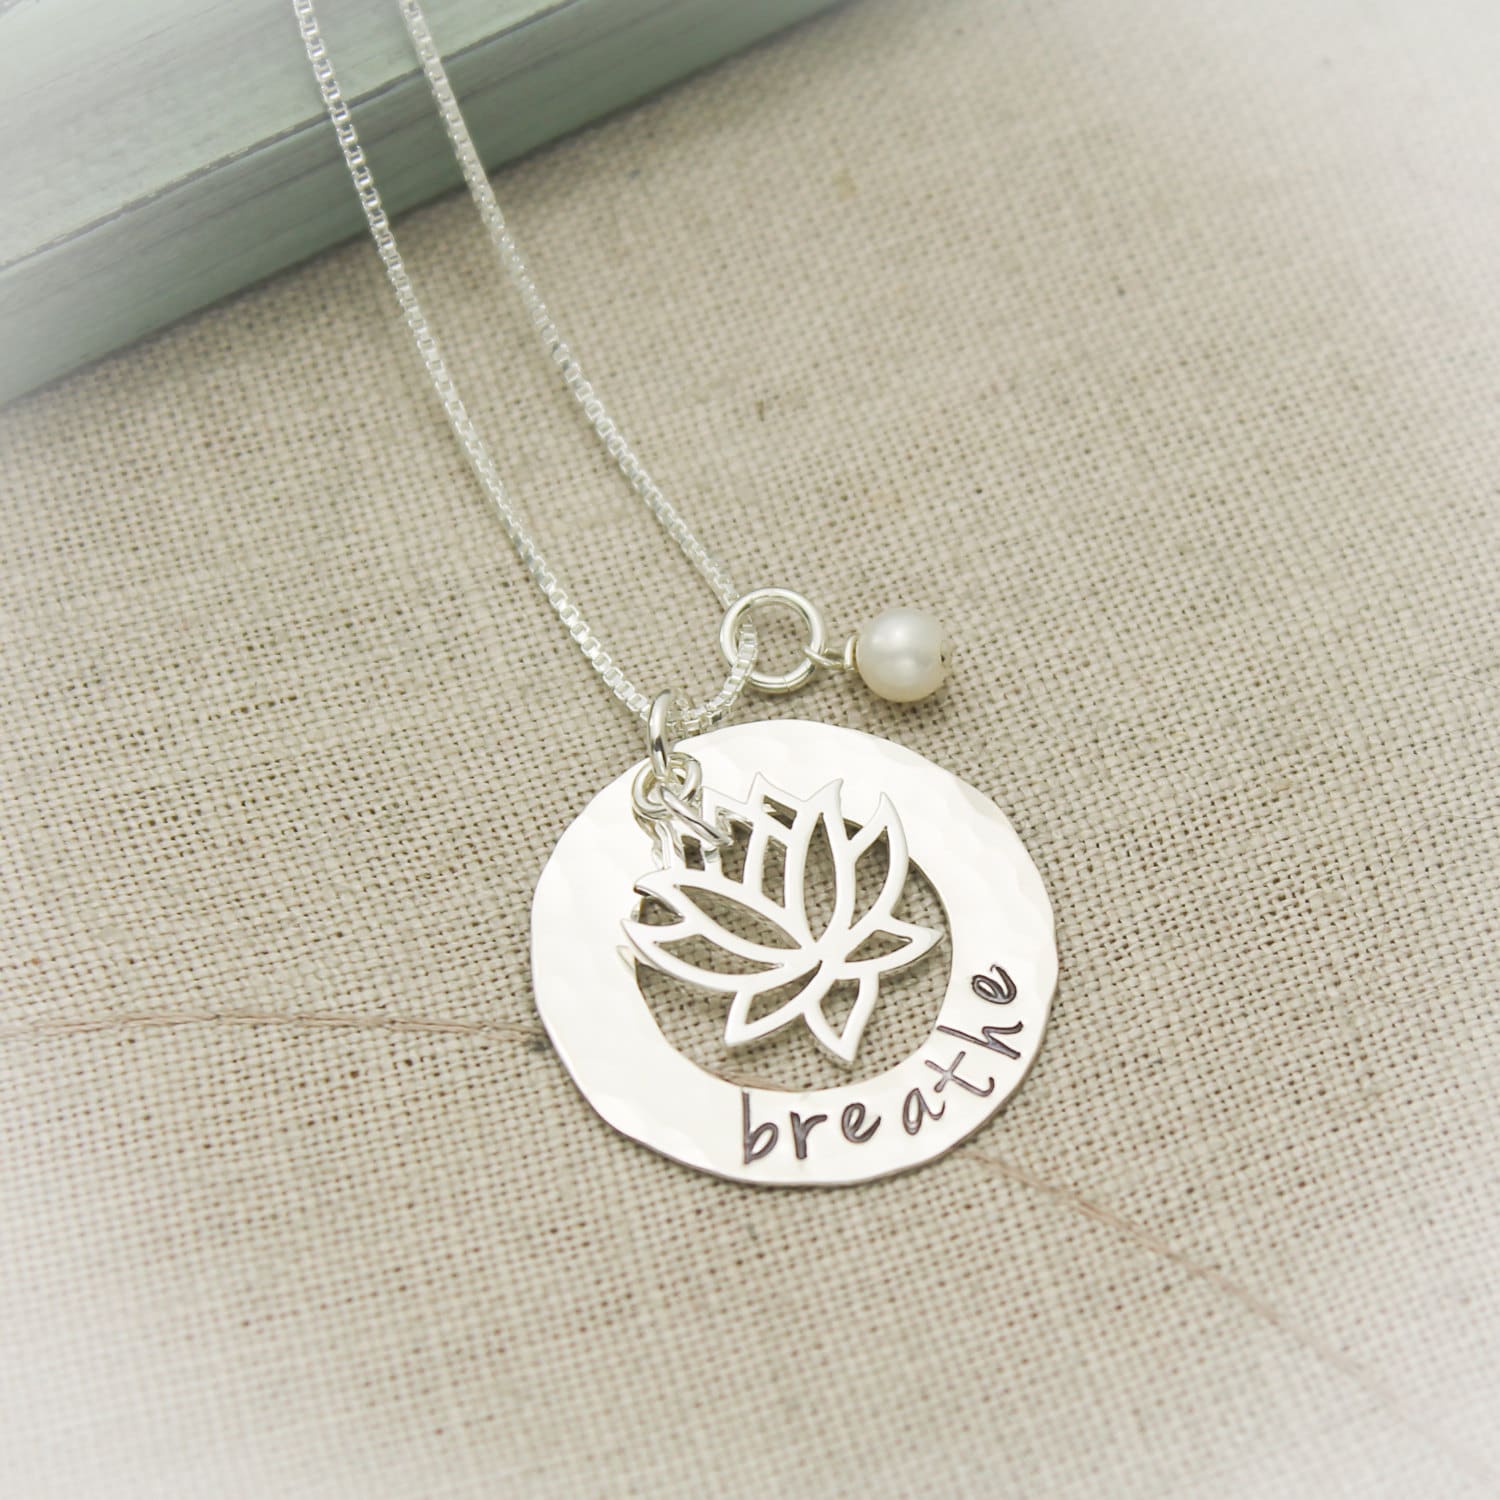 BREATHE Lotus Necklace, Yoga Jewelry, Lotus Flower Necklace, Yoga Gifts, Meditation Jewelry, Hand Stamped Jewelry, Sterling Silver